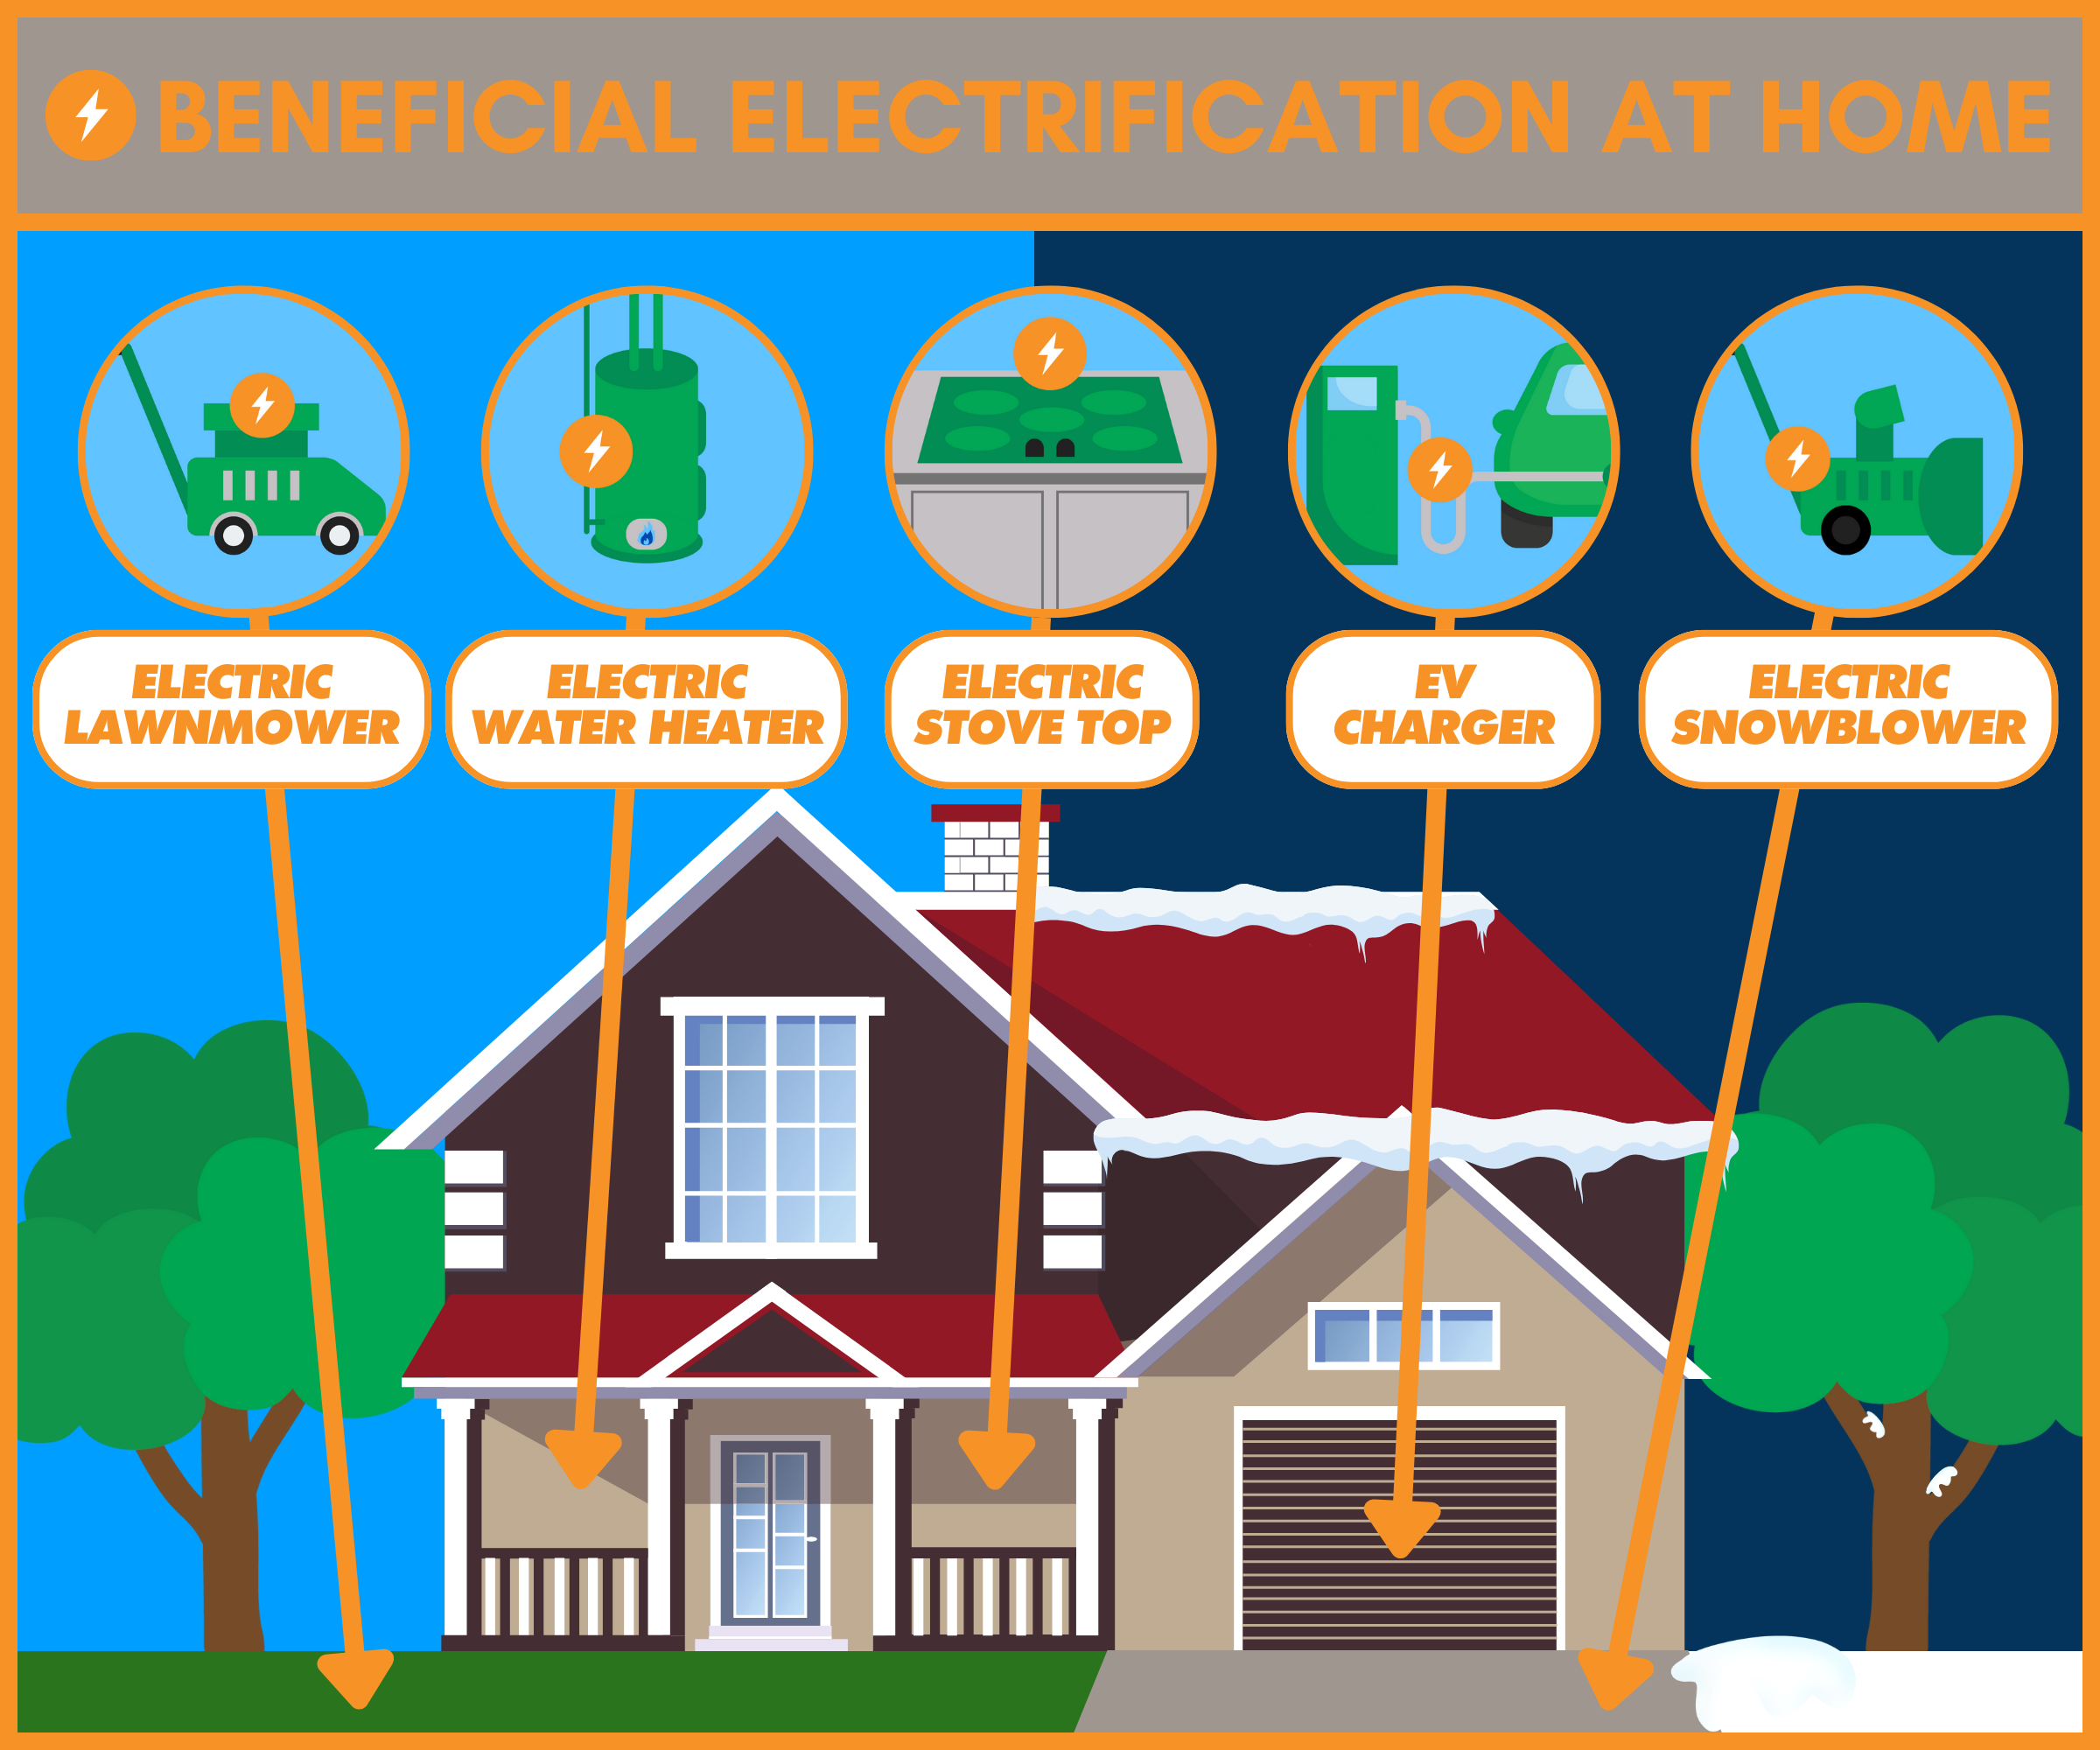 Beneficial Electrification at Home graphic